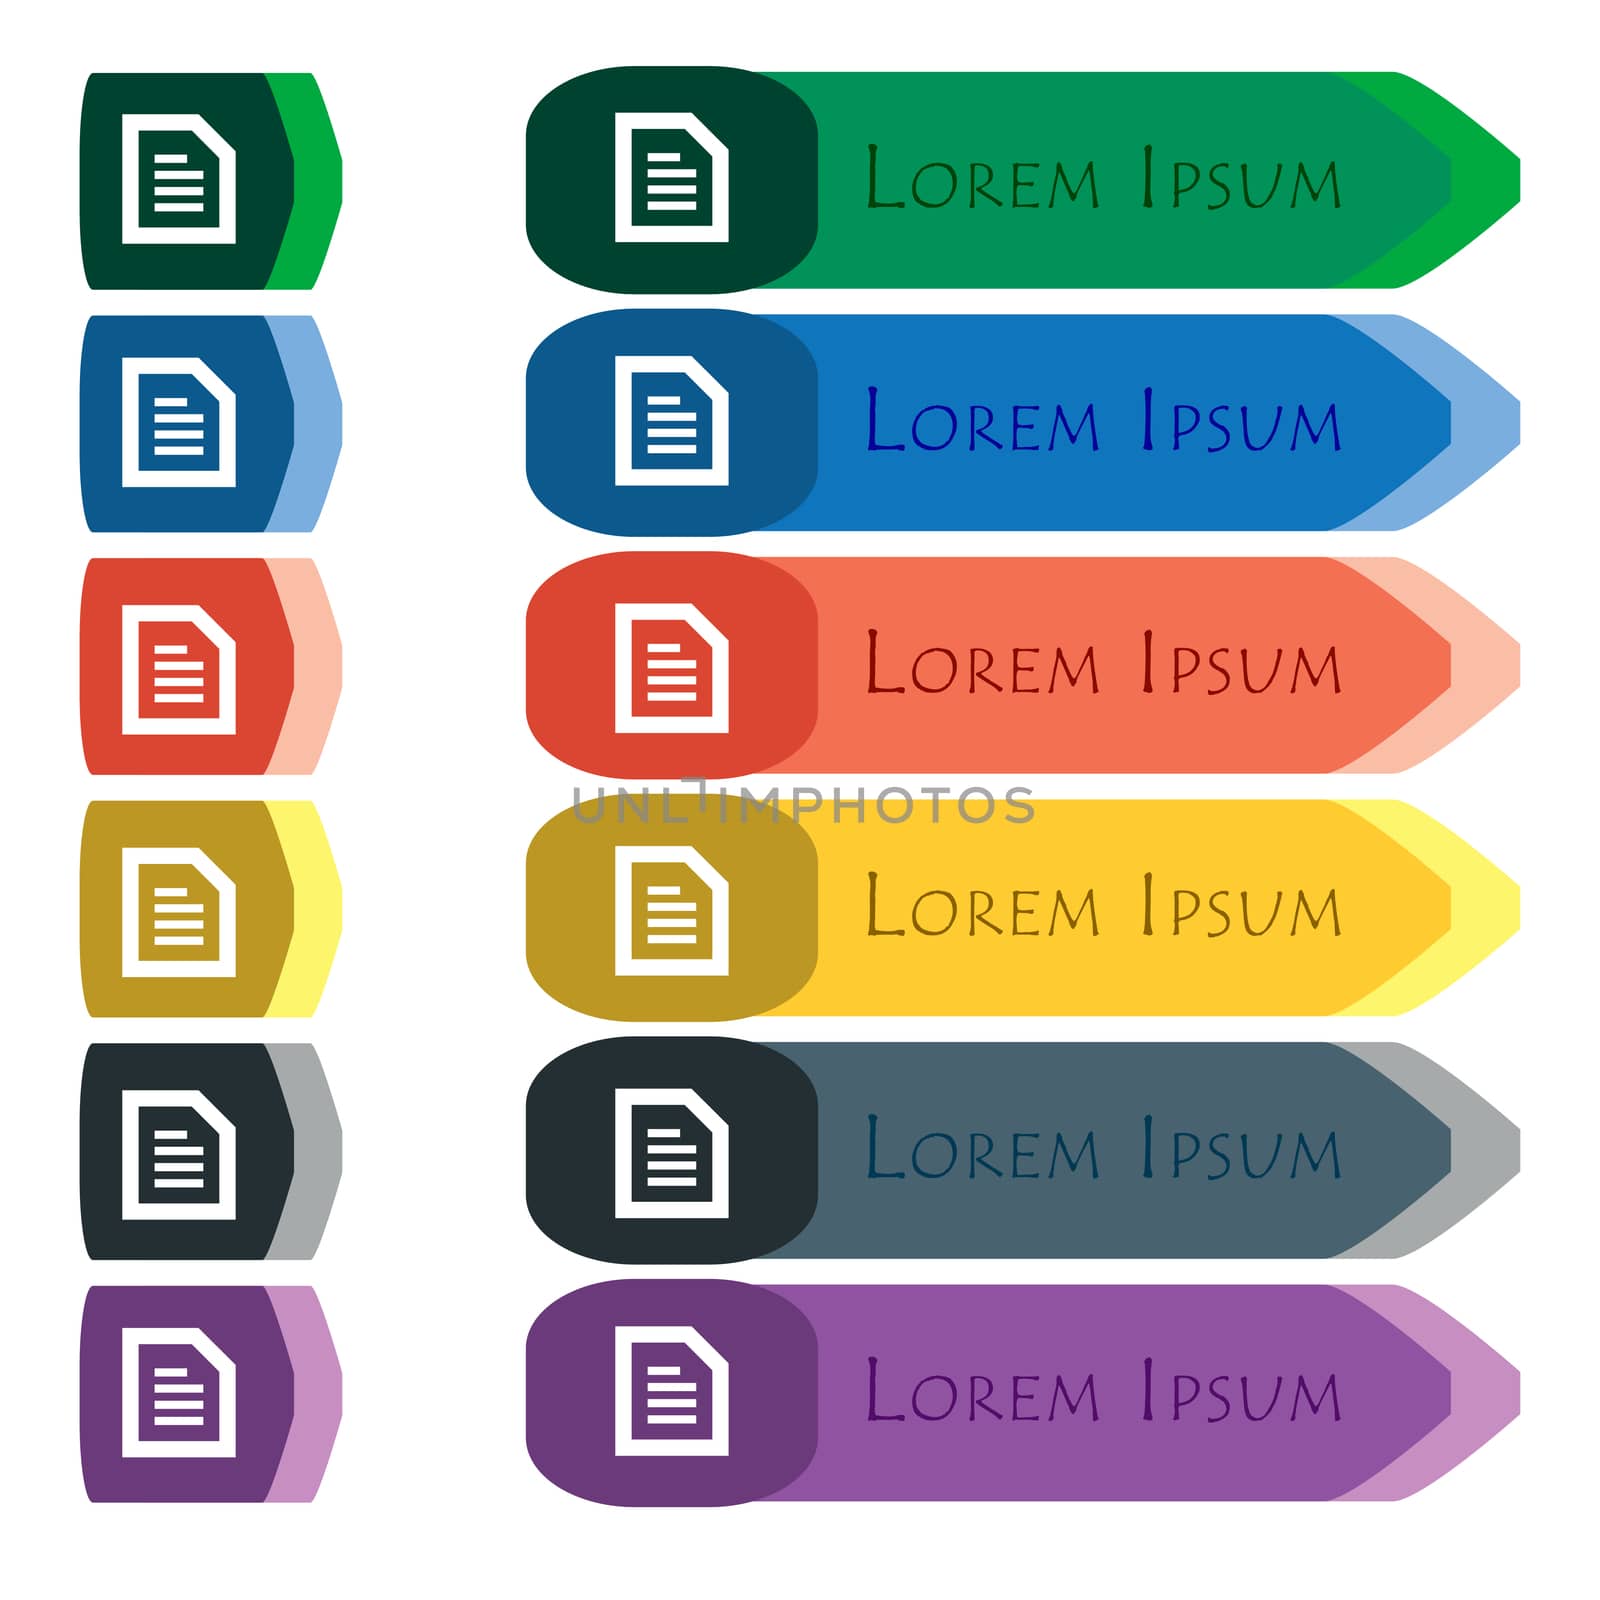 Text File document icon sign. Set of colorful, bright long buttons with additional small modules. Flat design. 